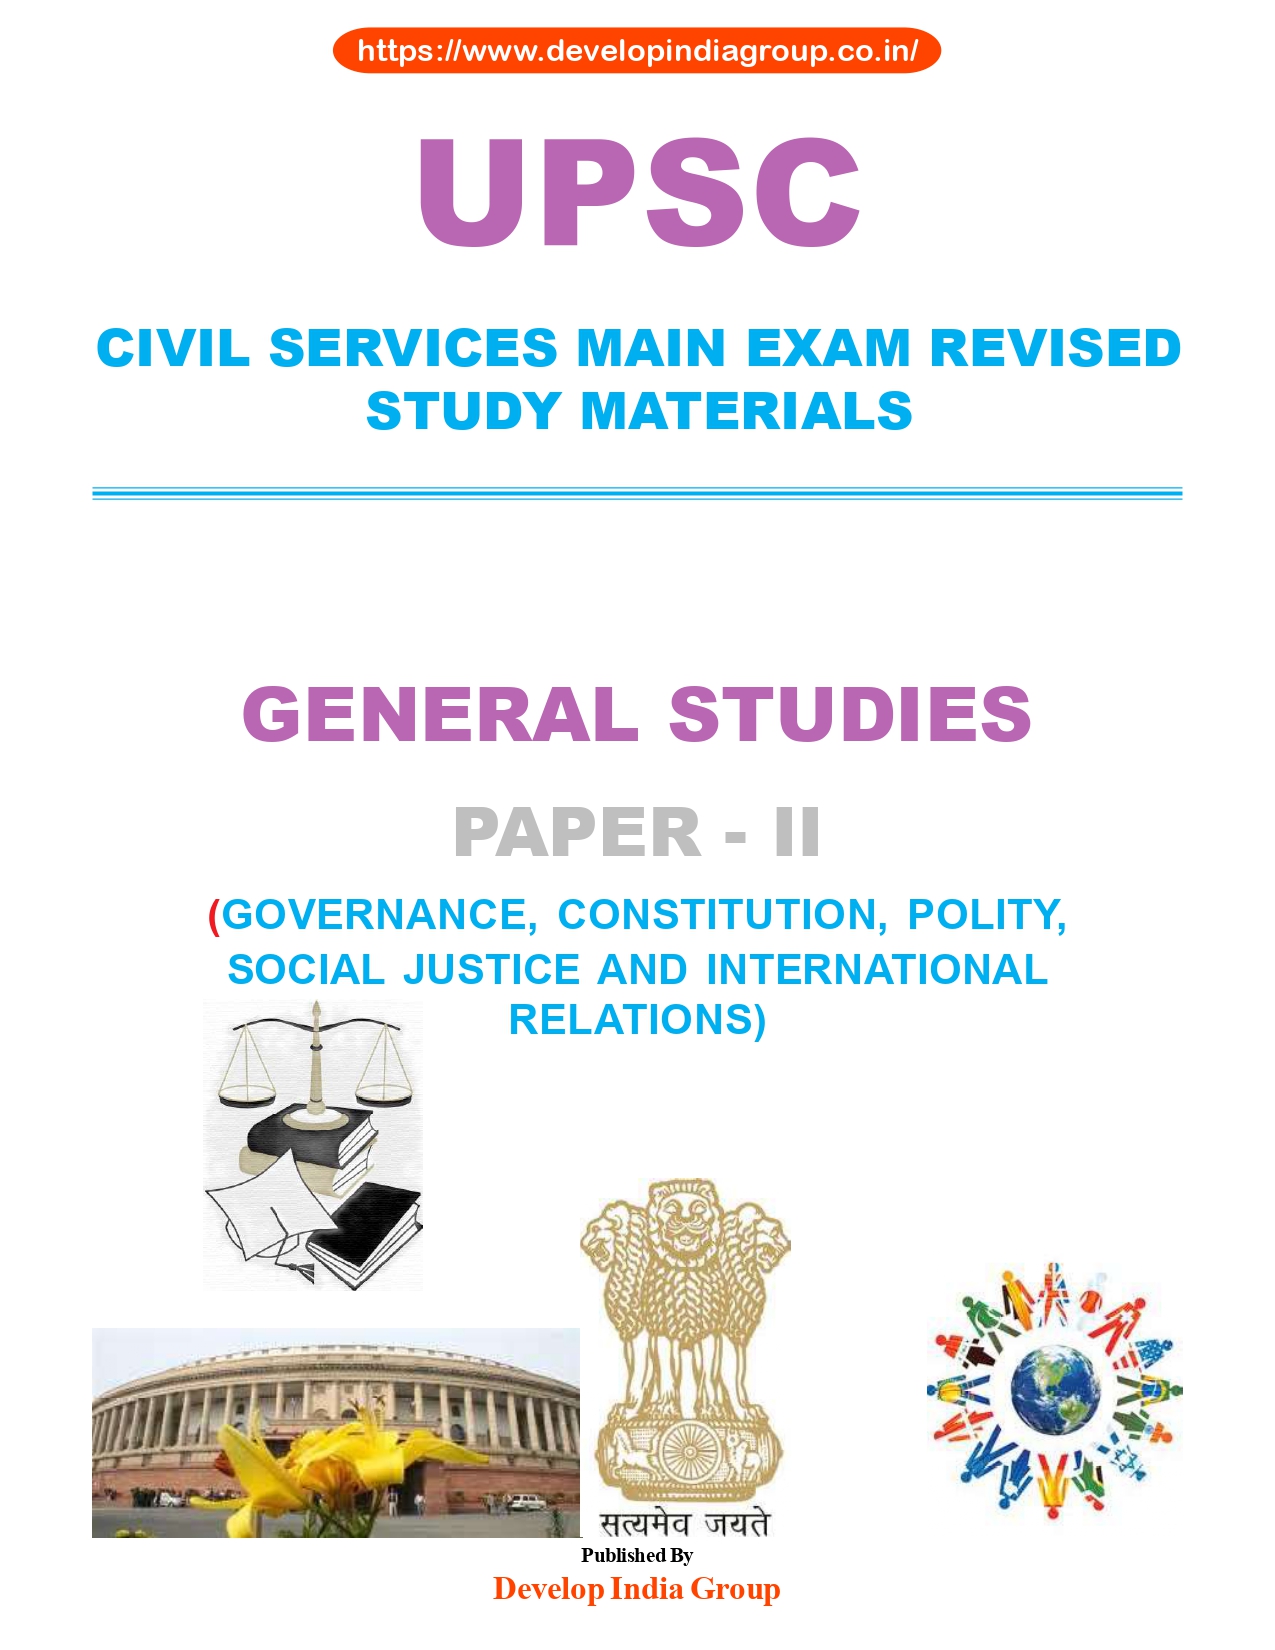 Governance, Constitution, Polity, Social Justice and International relations cover